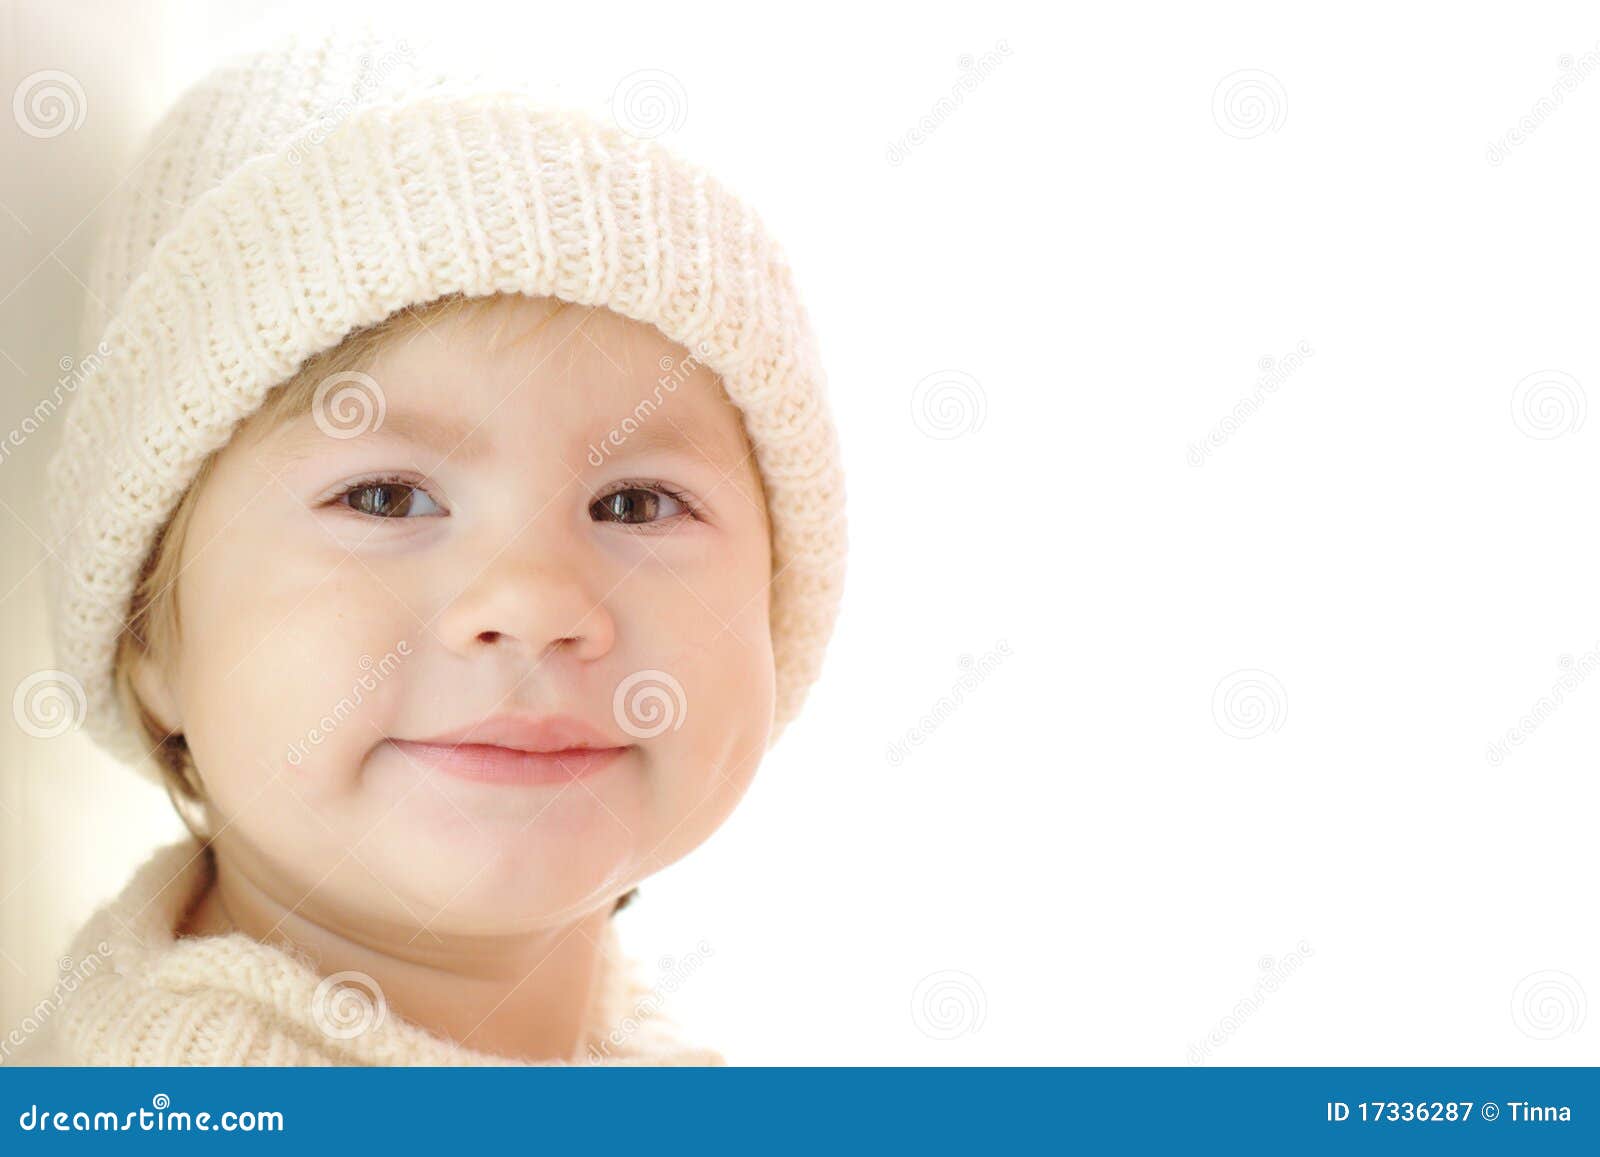 Cute Baby Girl Wearing Warm Clothes Stock Image - Image of beautiful ...